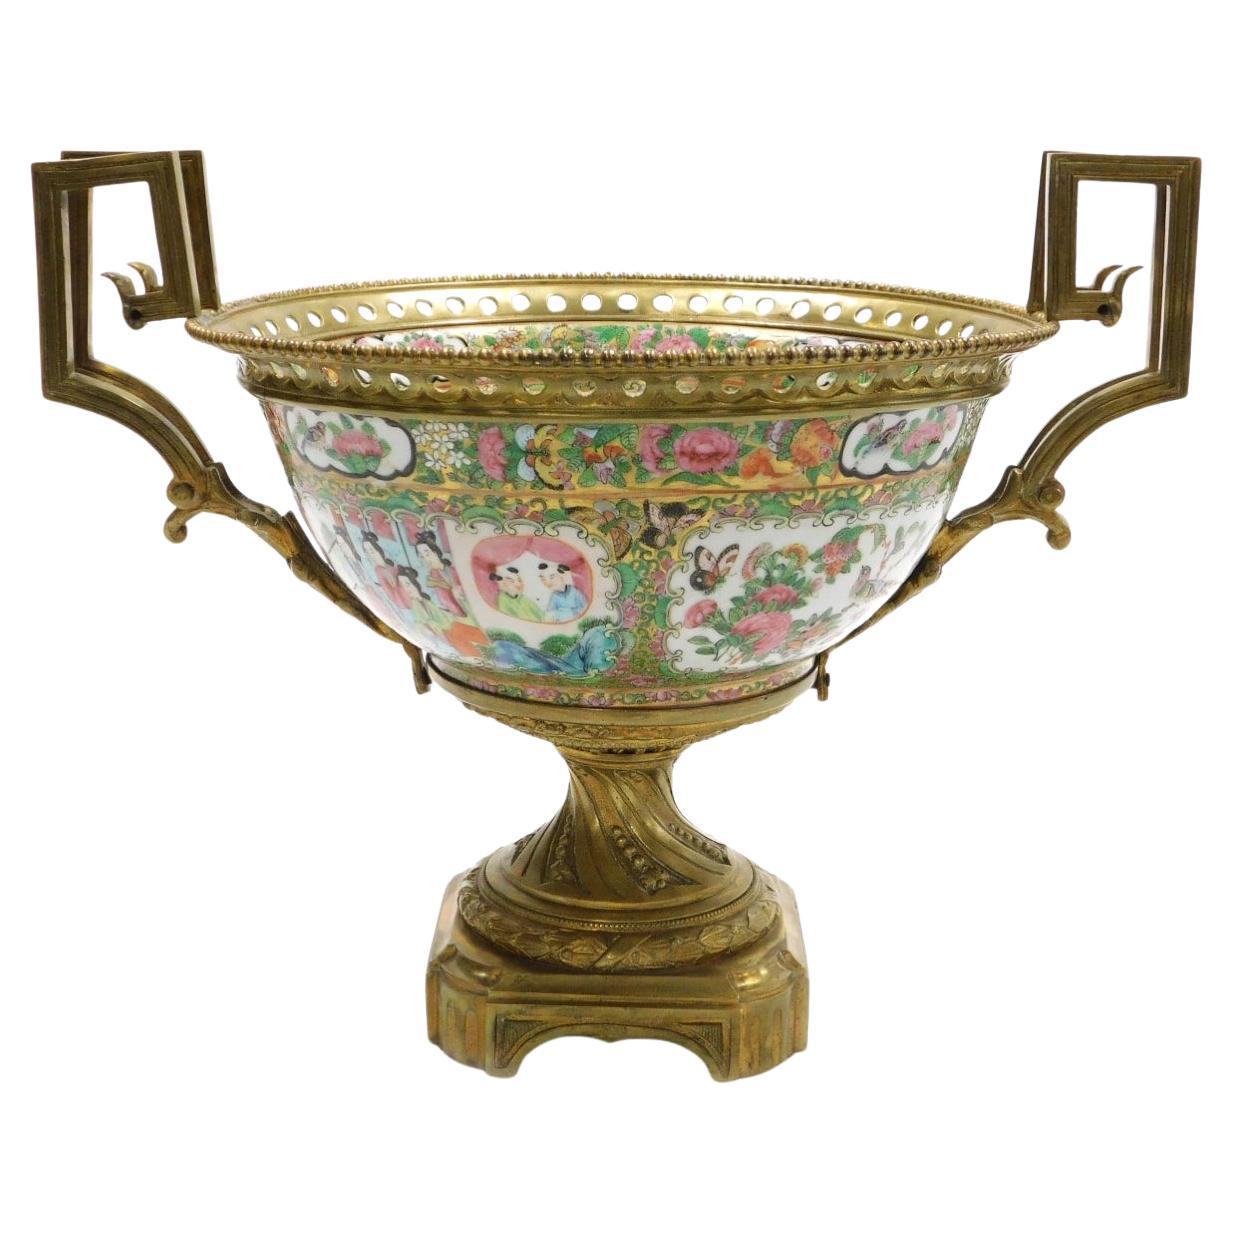 A Large 19th C Cantonese famille rose porcelain and ormolu mounted bowl. For Sale